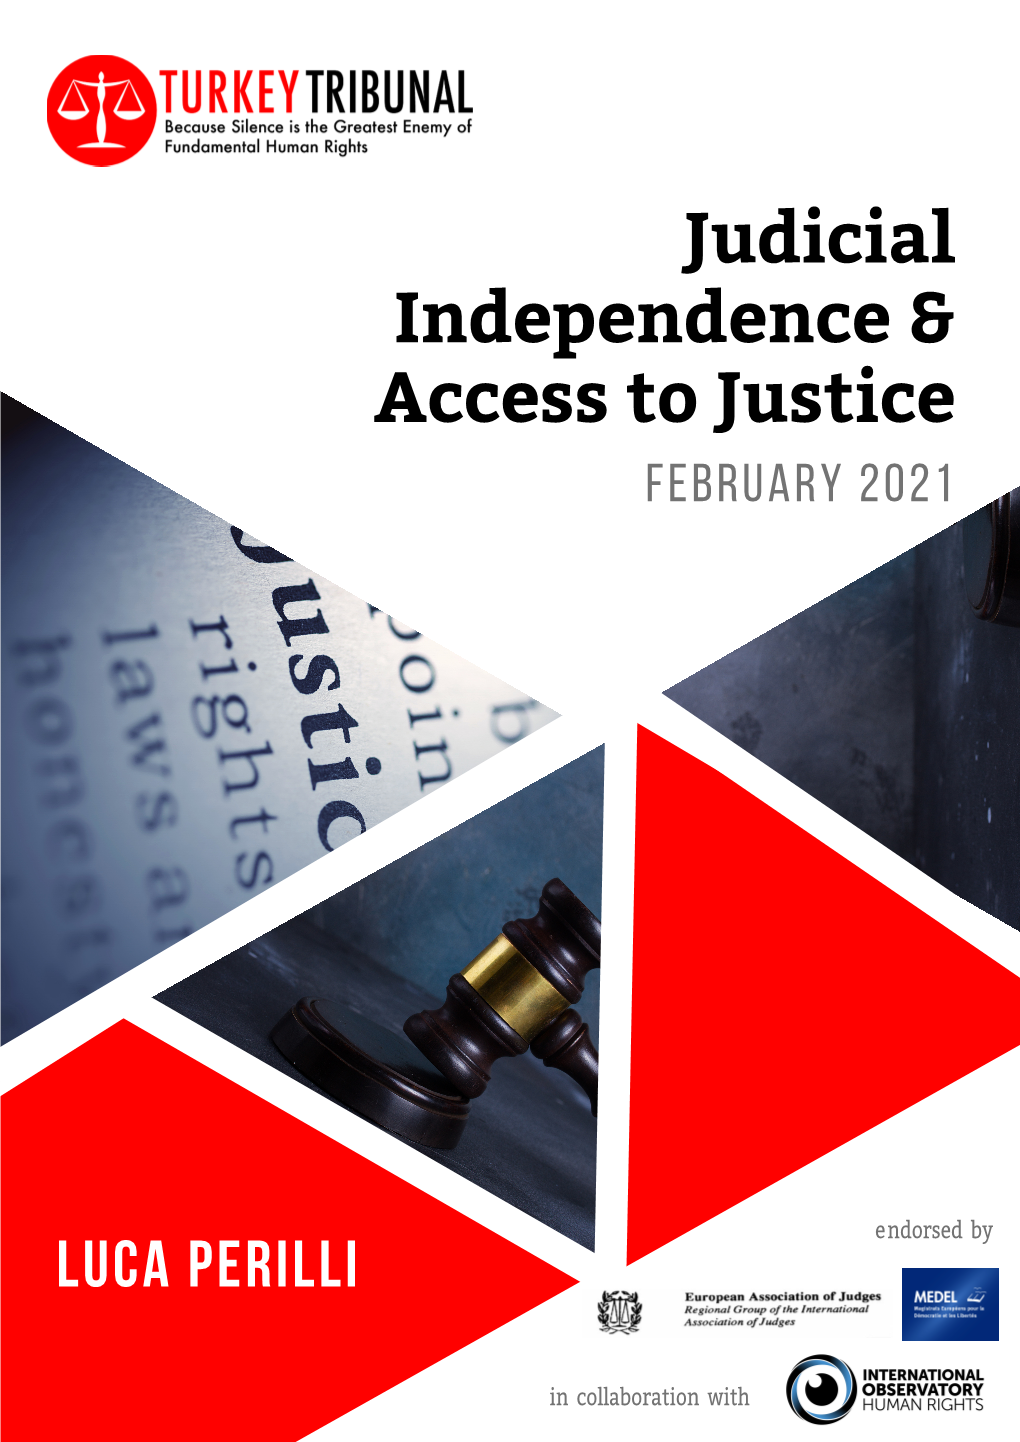 Judicial Independence & Access to Justice